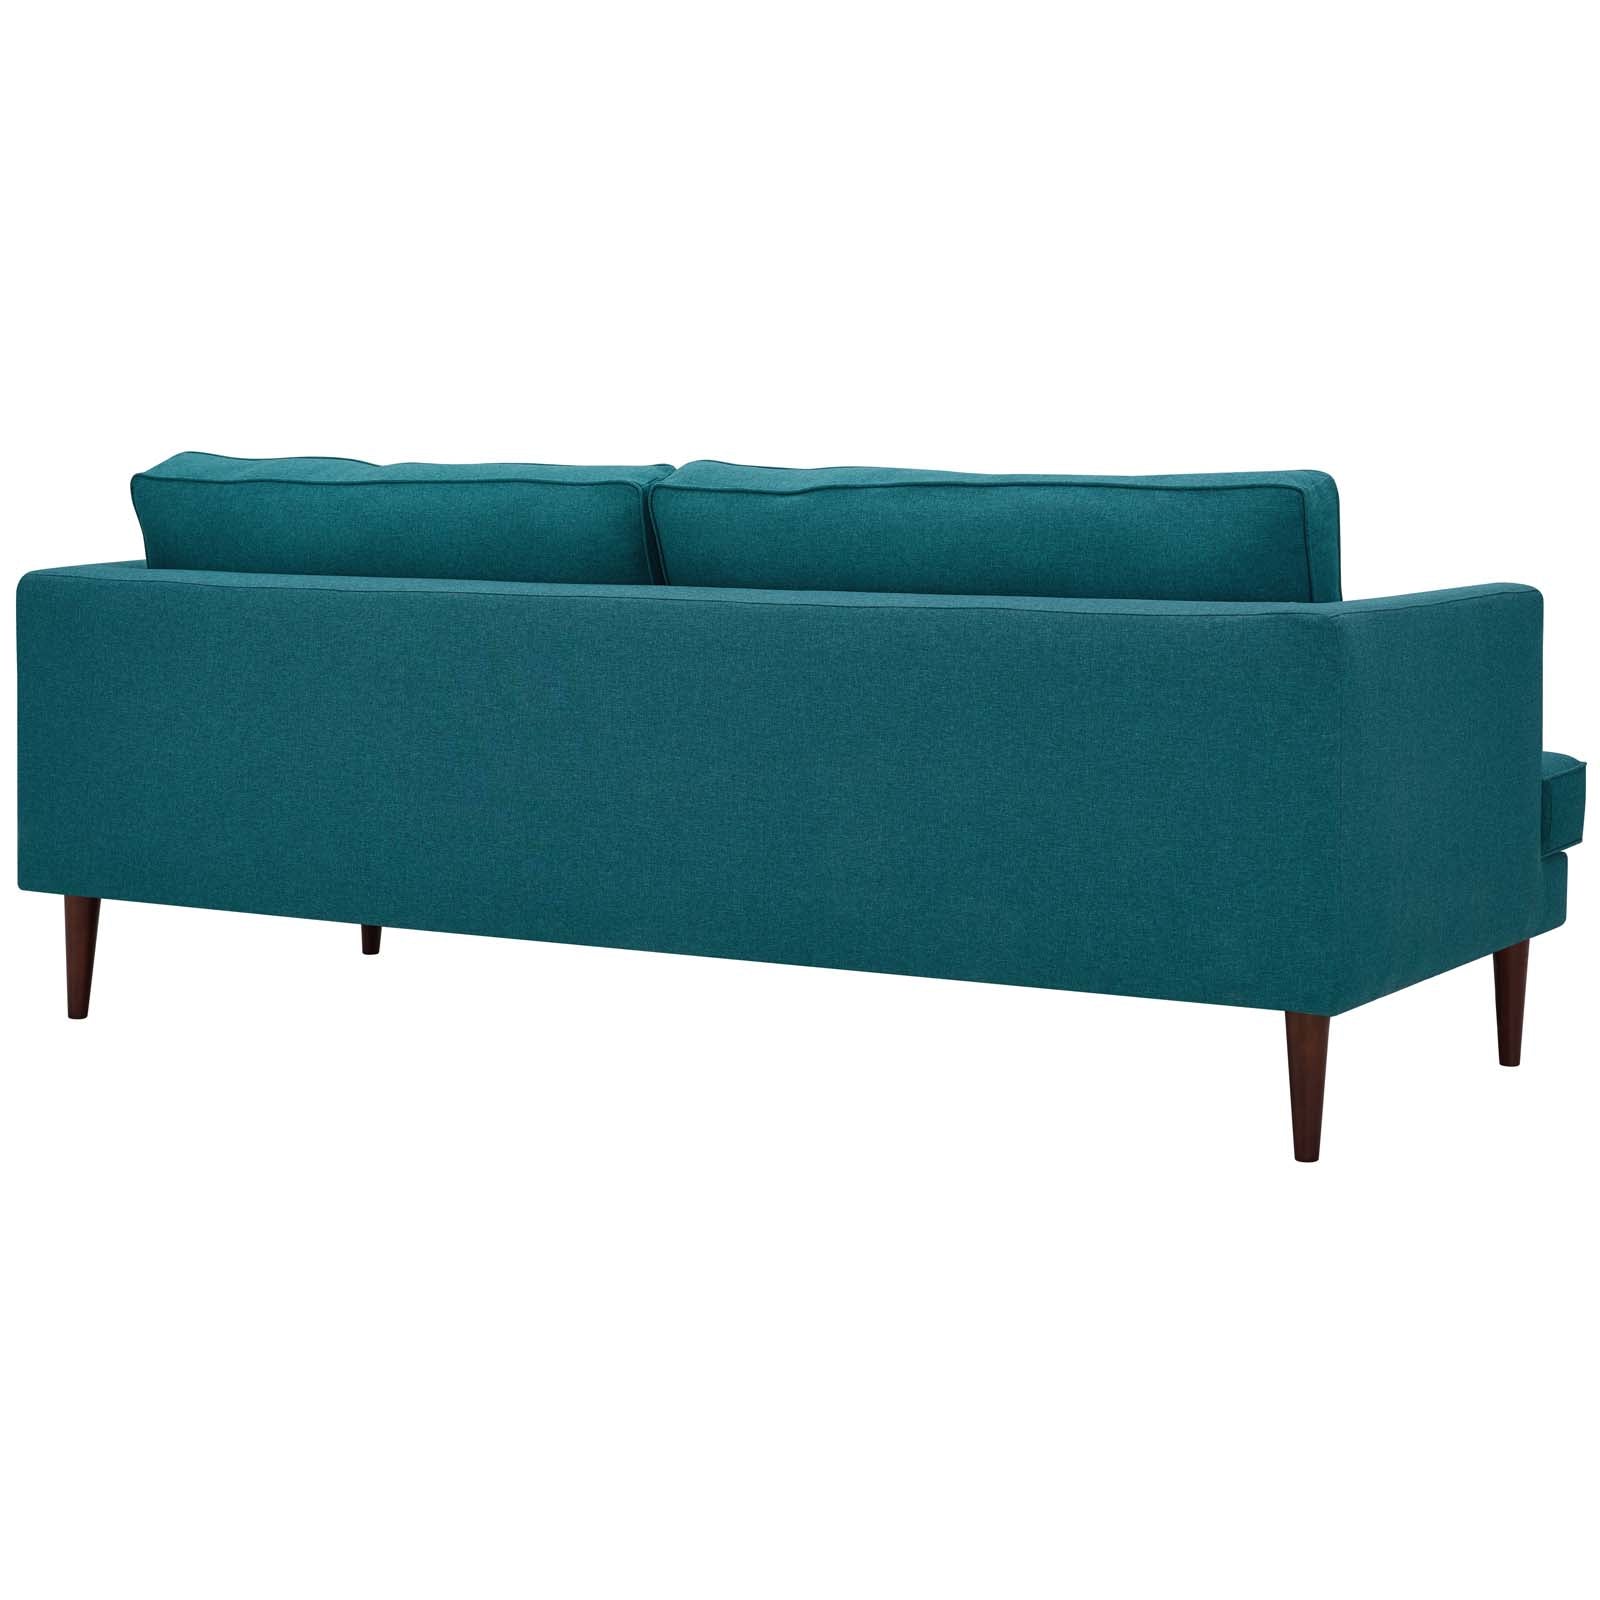 Modway Sofas & Couches - Agile Upholstered Fabric Sofa Teal